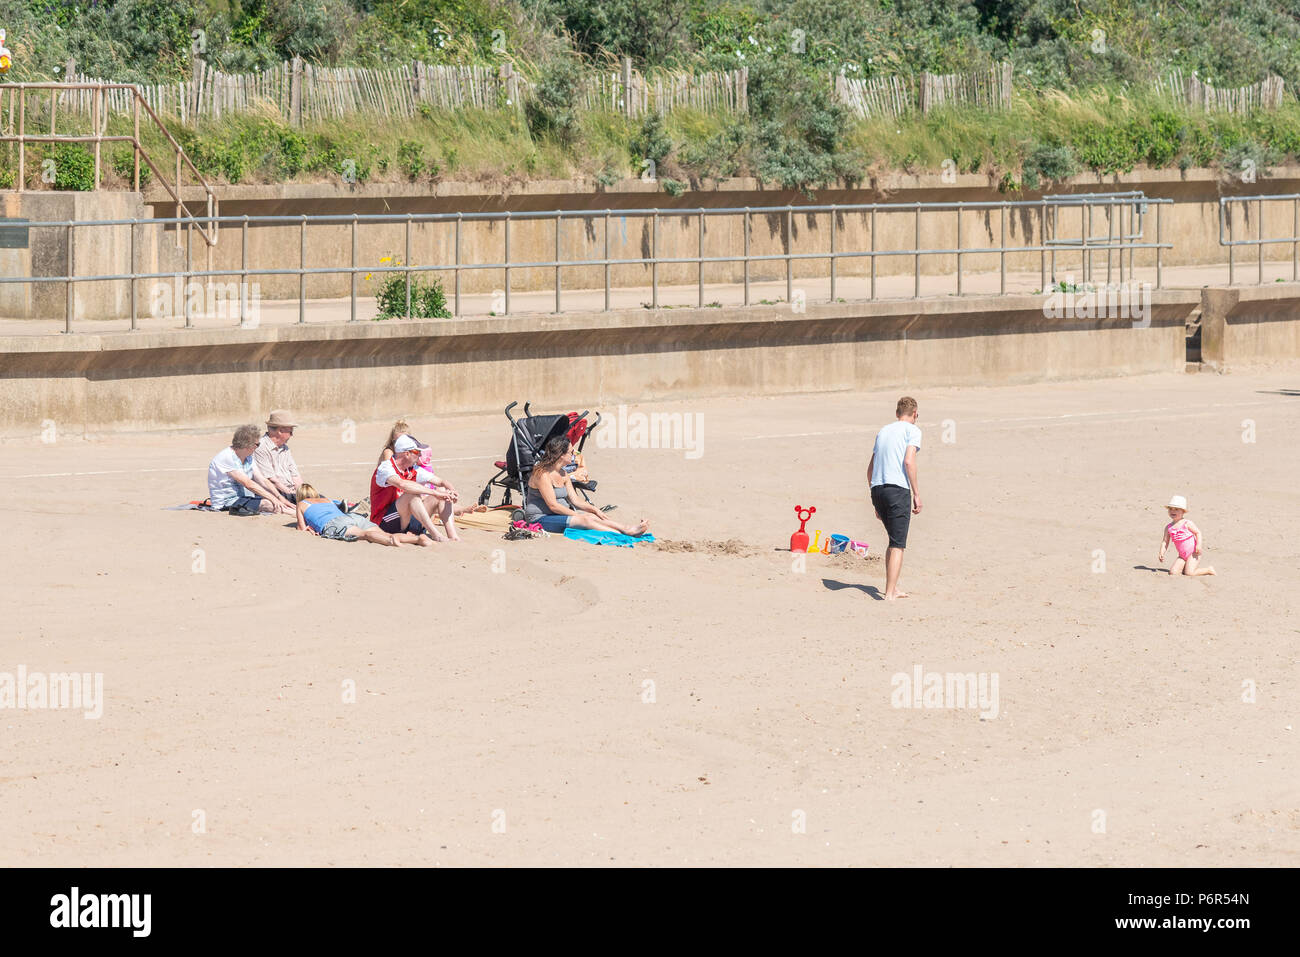 Skegness, UK, 2nd July 2018. Parents and children playing and sunbathing on the beach, enjoying the hot weather during a continued heatwave. Credit: Steven Booth/Alamy Live News Stock Photo